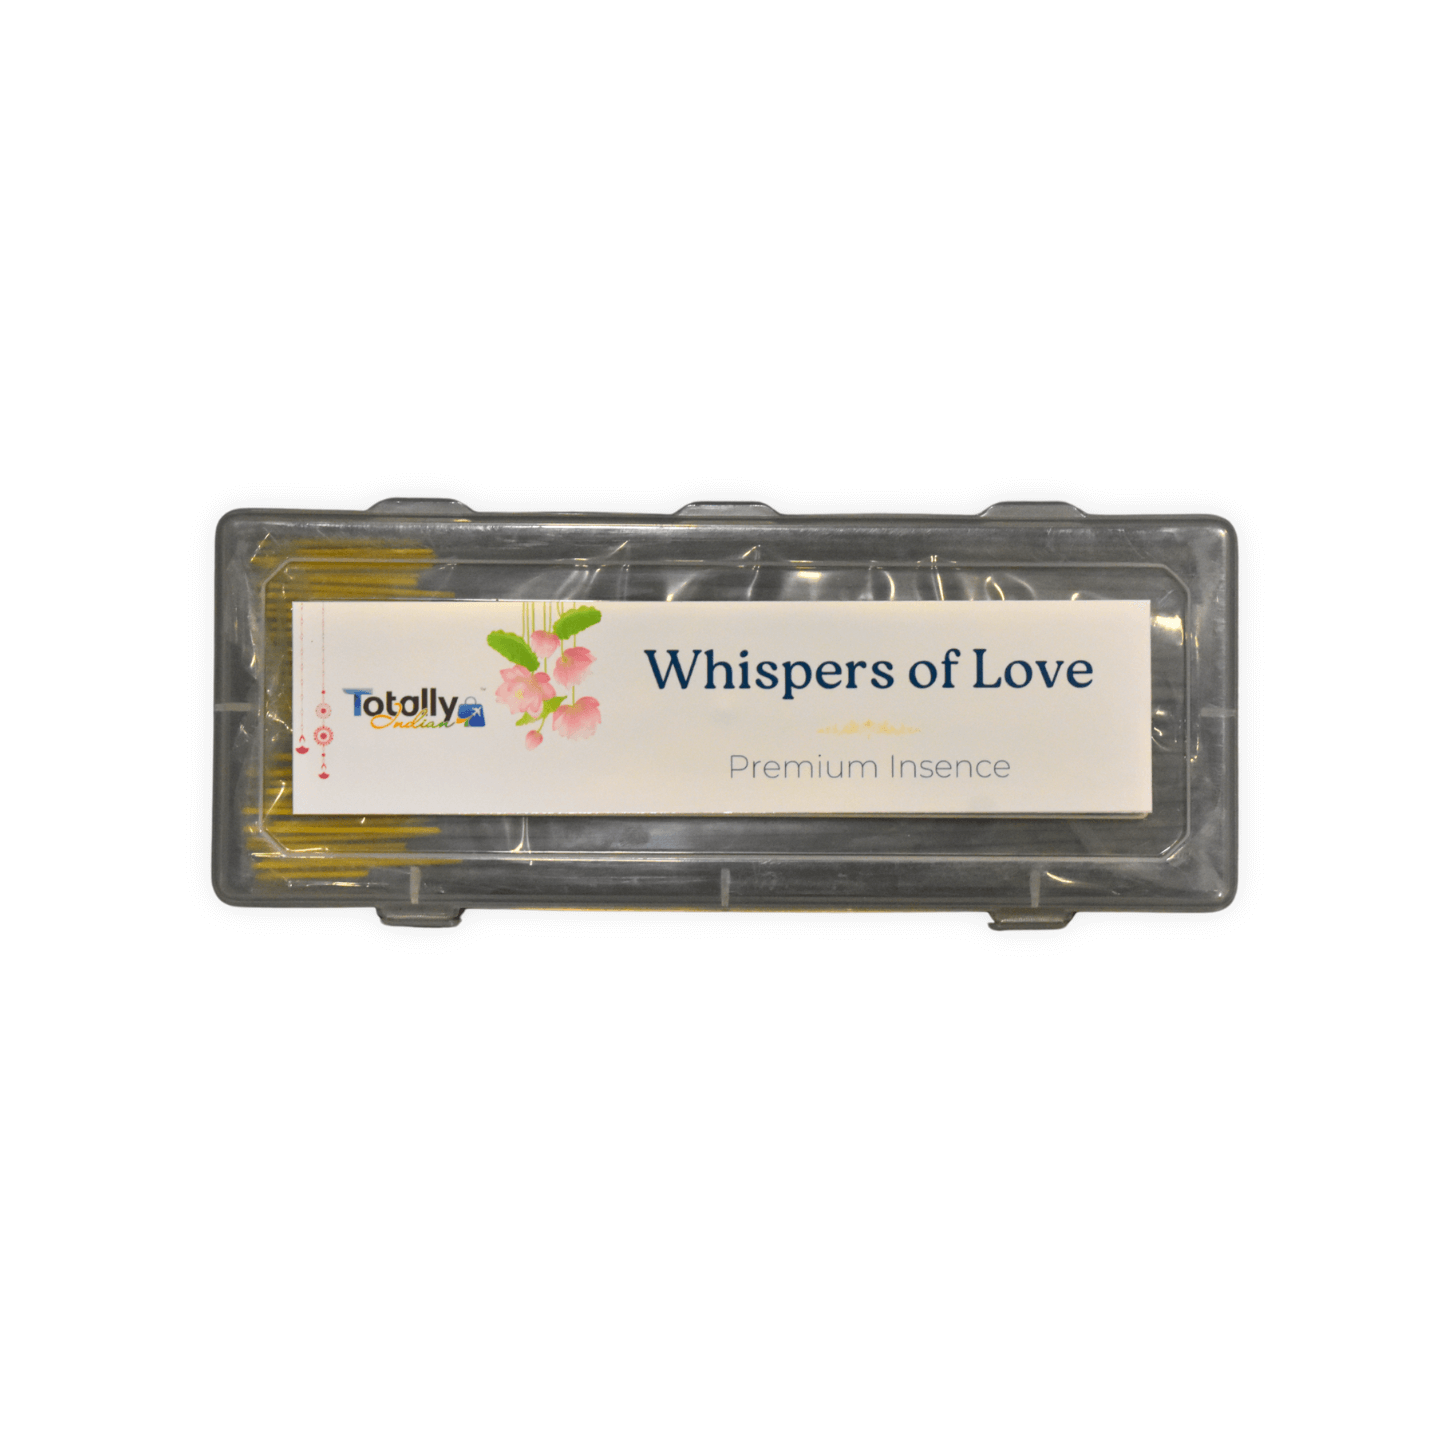 Smoke-less Premium Masala Incense | Whispers of Love - Totally Indian